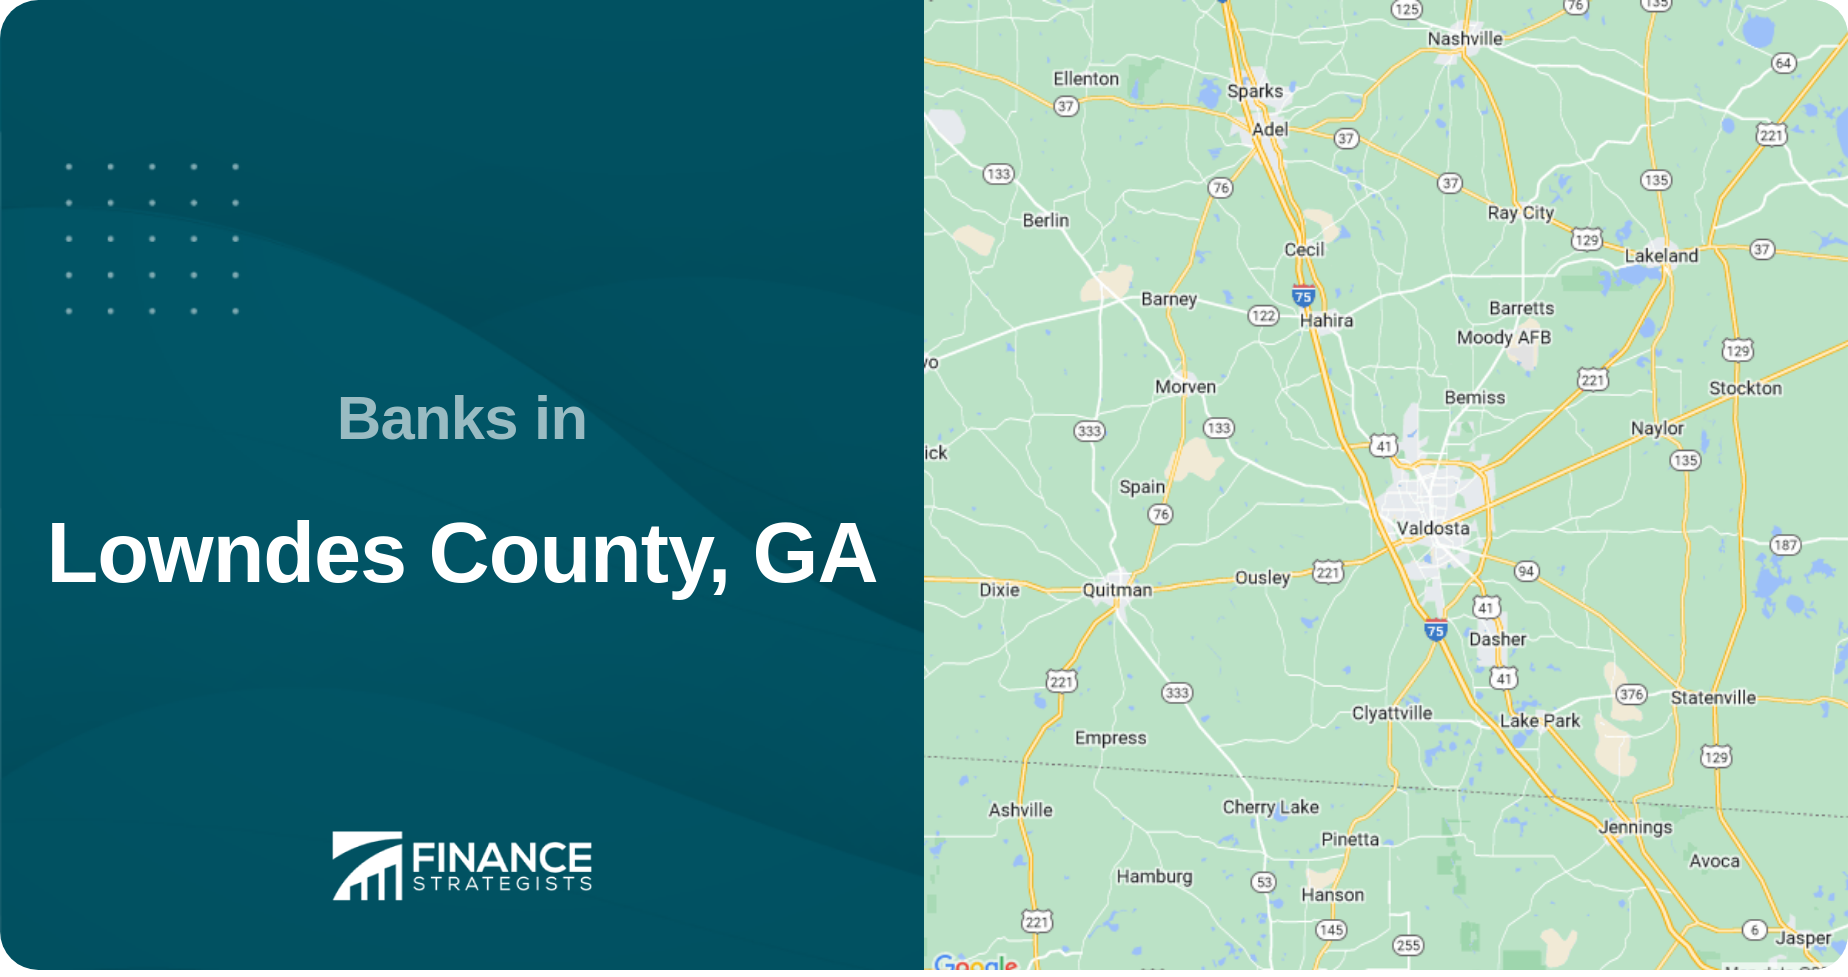 Banks in Lowndes County, GA